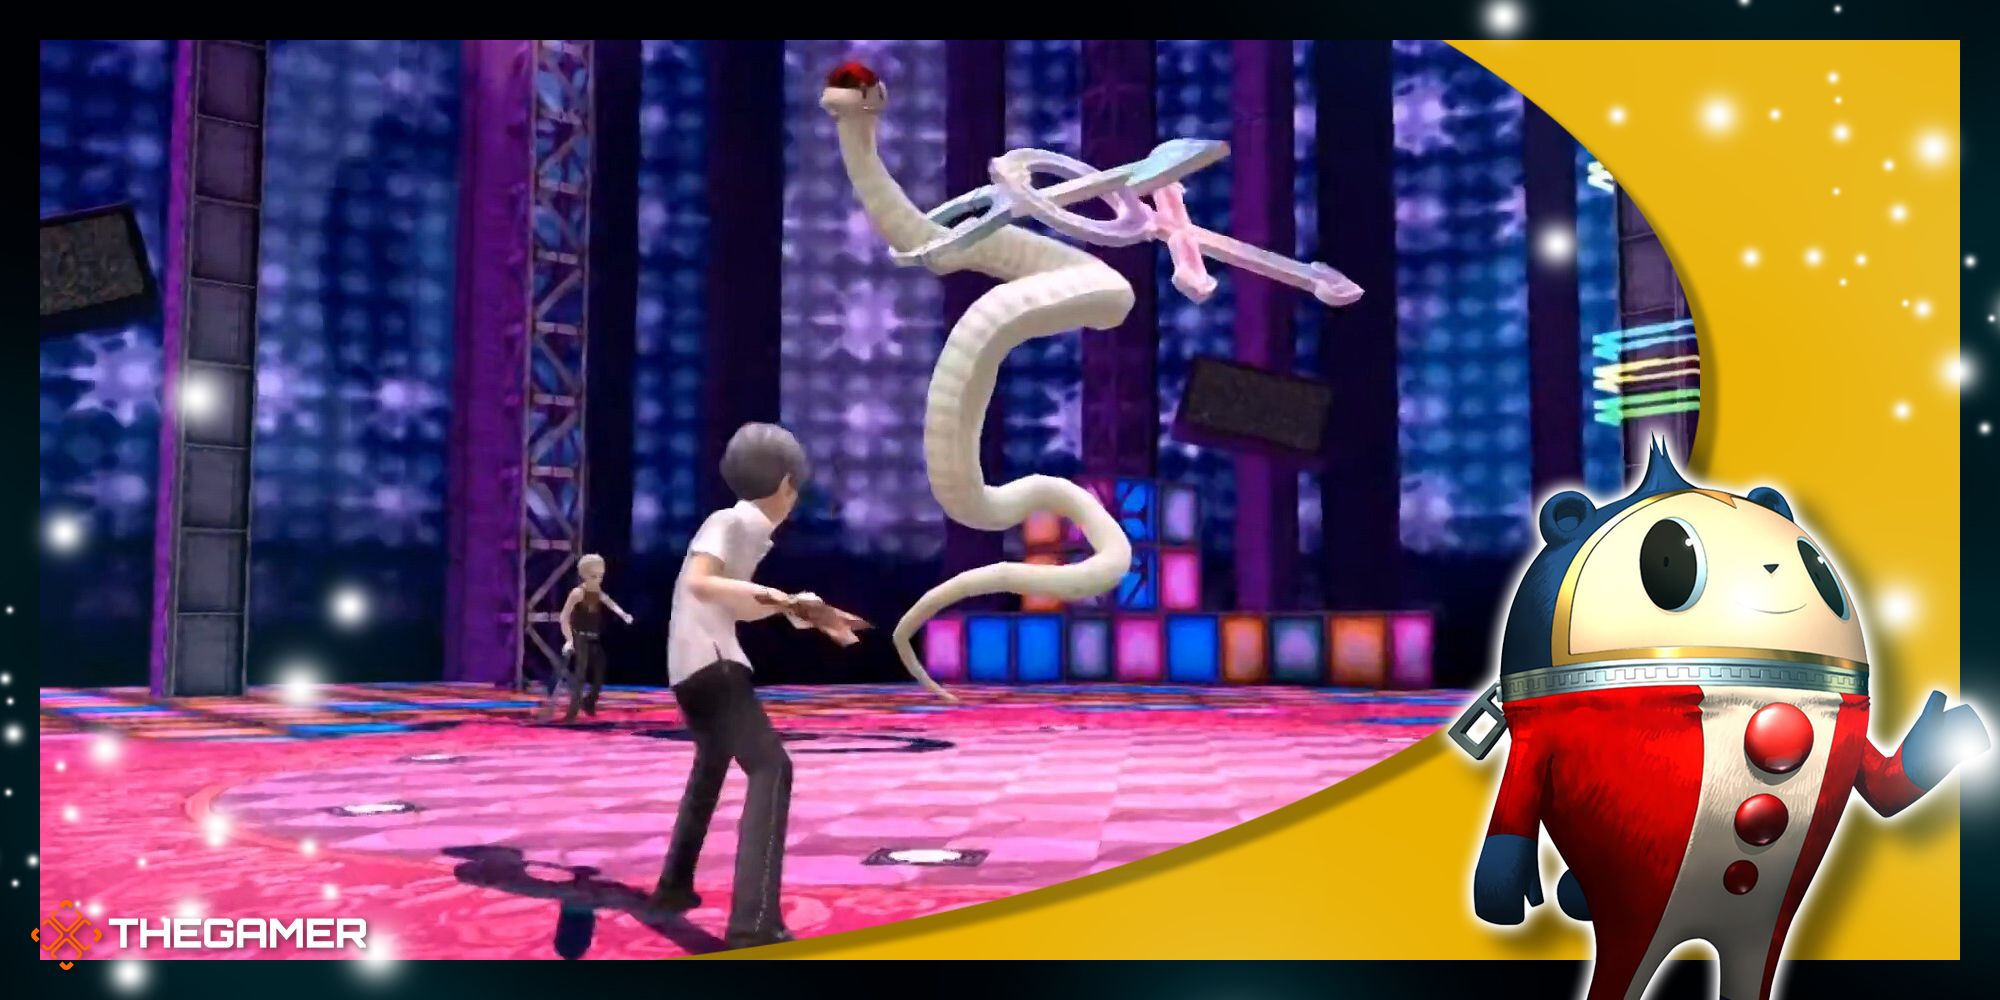 yu narukami facing off with amorous snake in the marukyu striptease dungeon in persona 4 golden